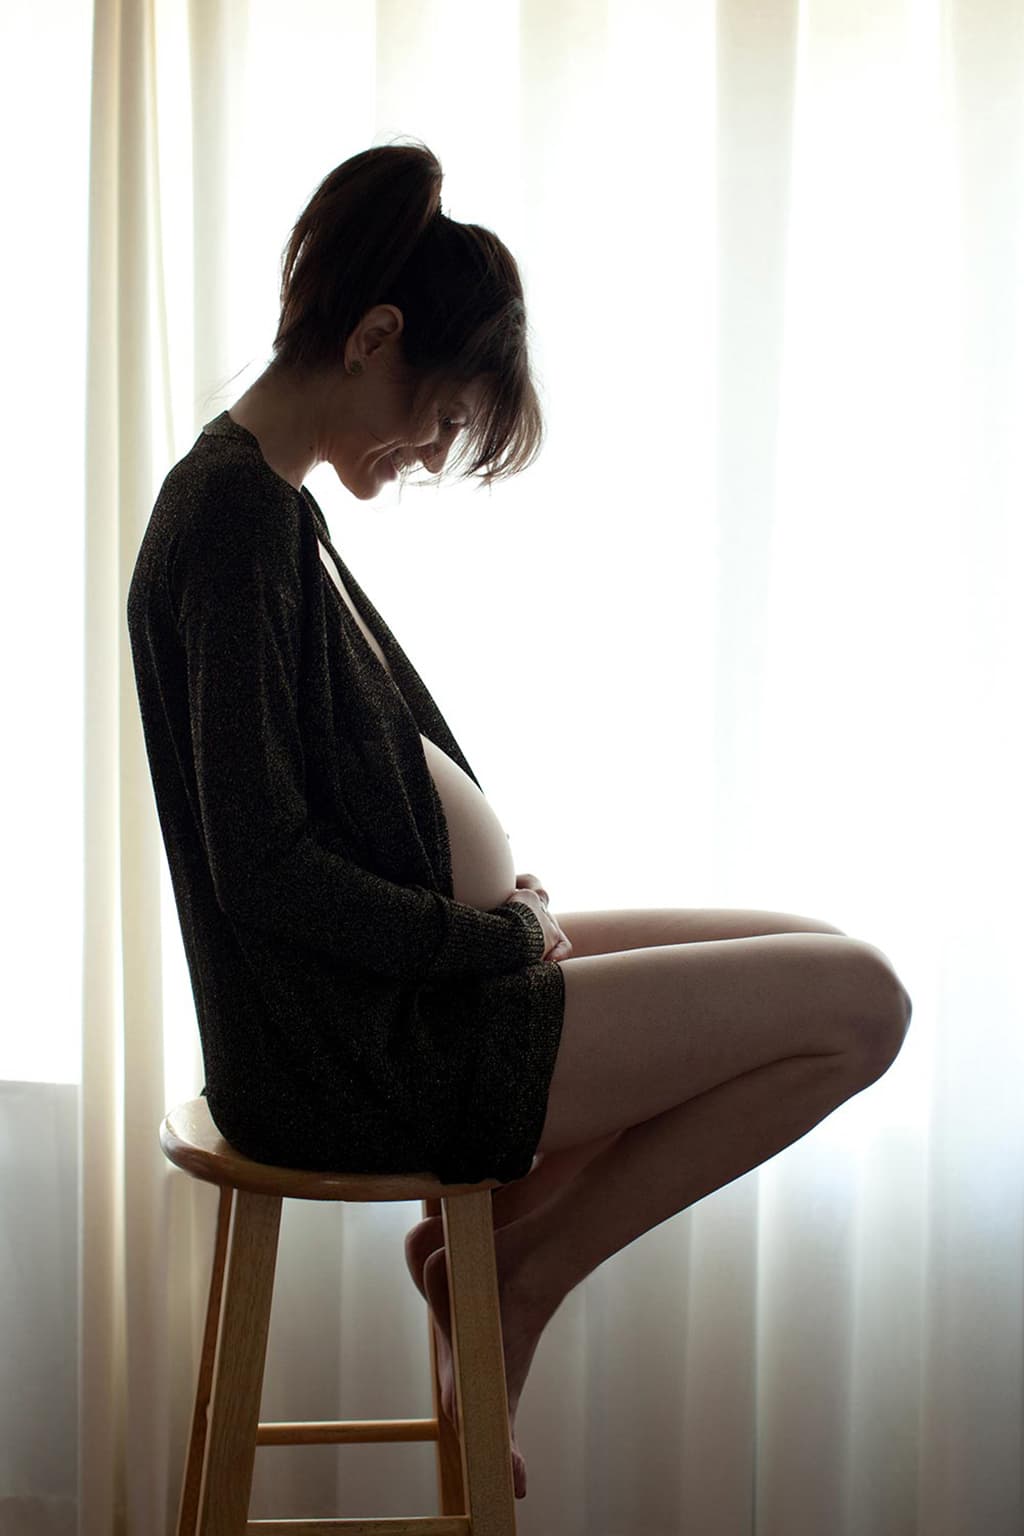 modest maternity photo of woman in black robe